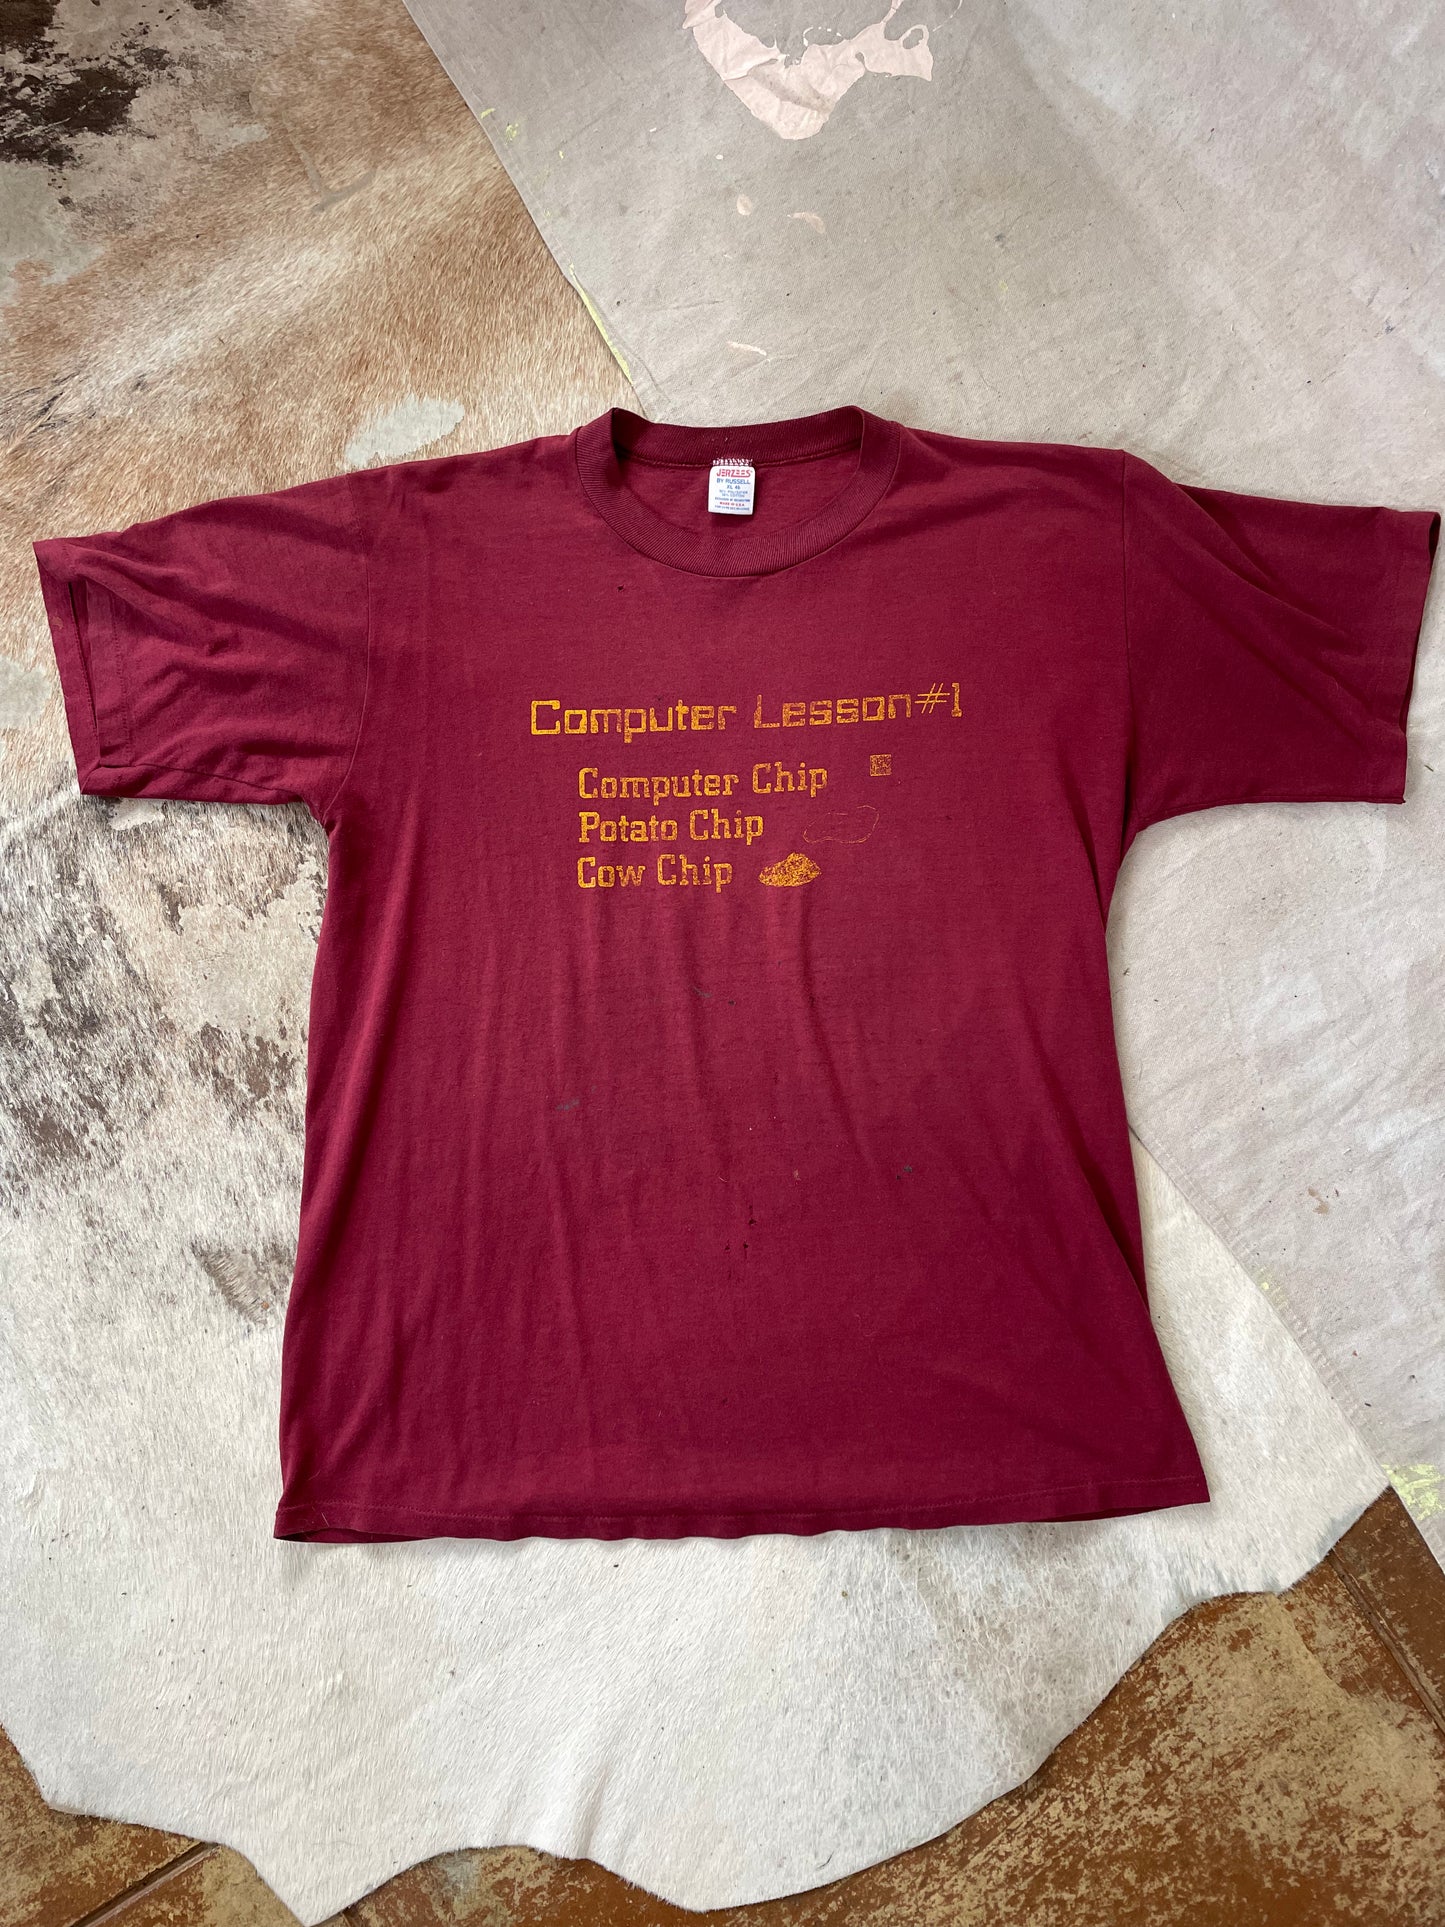 80s/90s Computer Lesson #1 Funny Tee